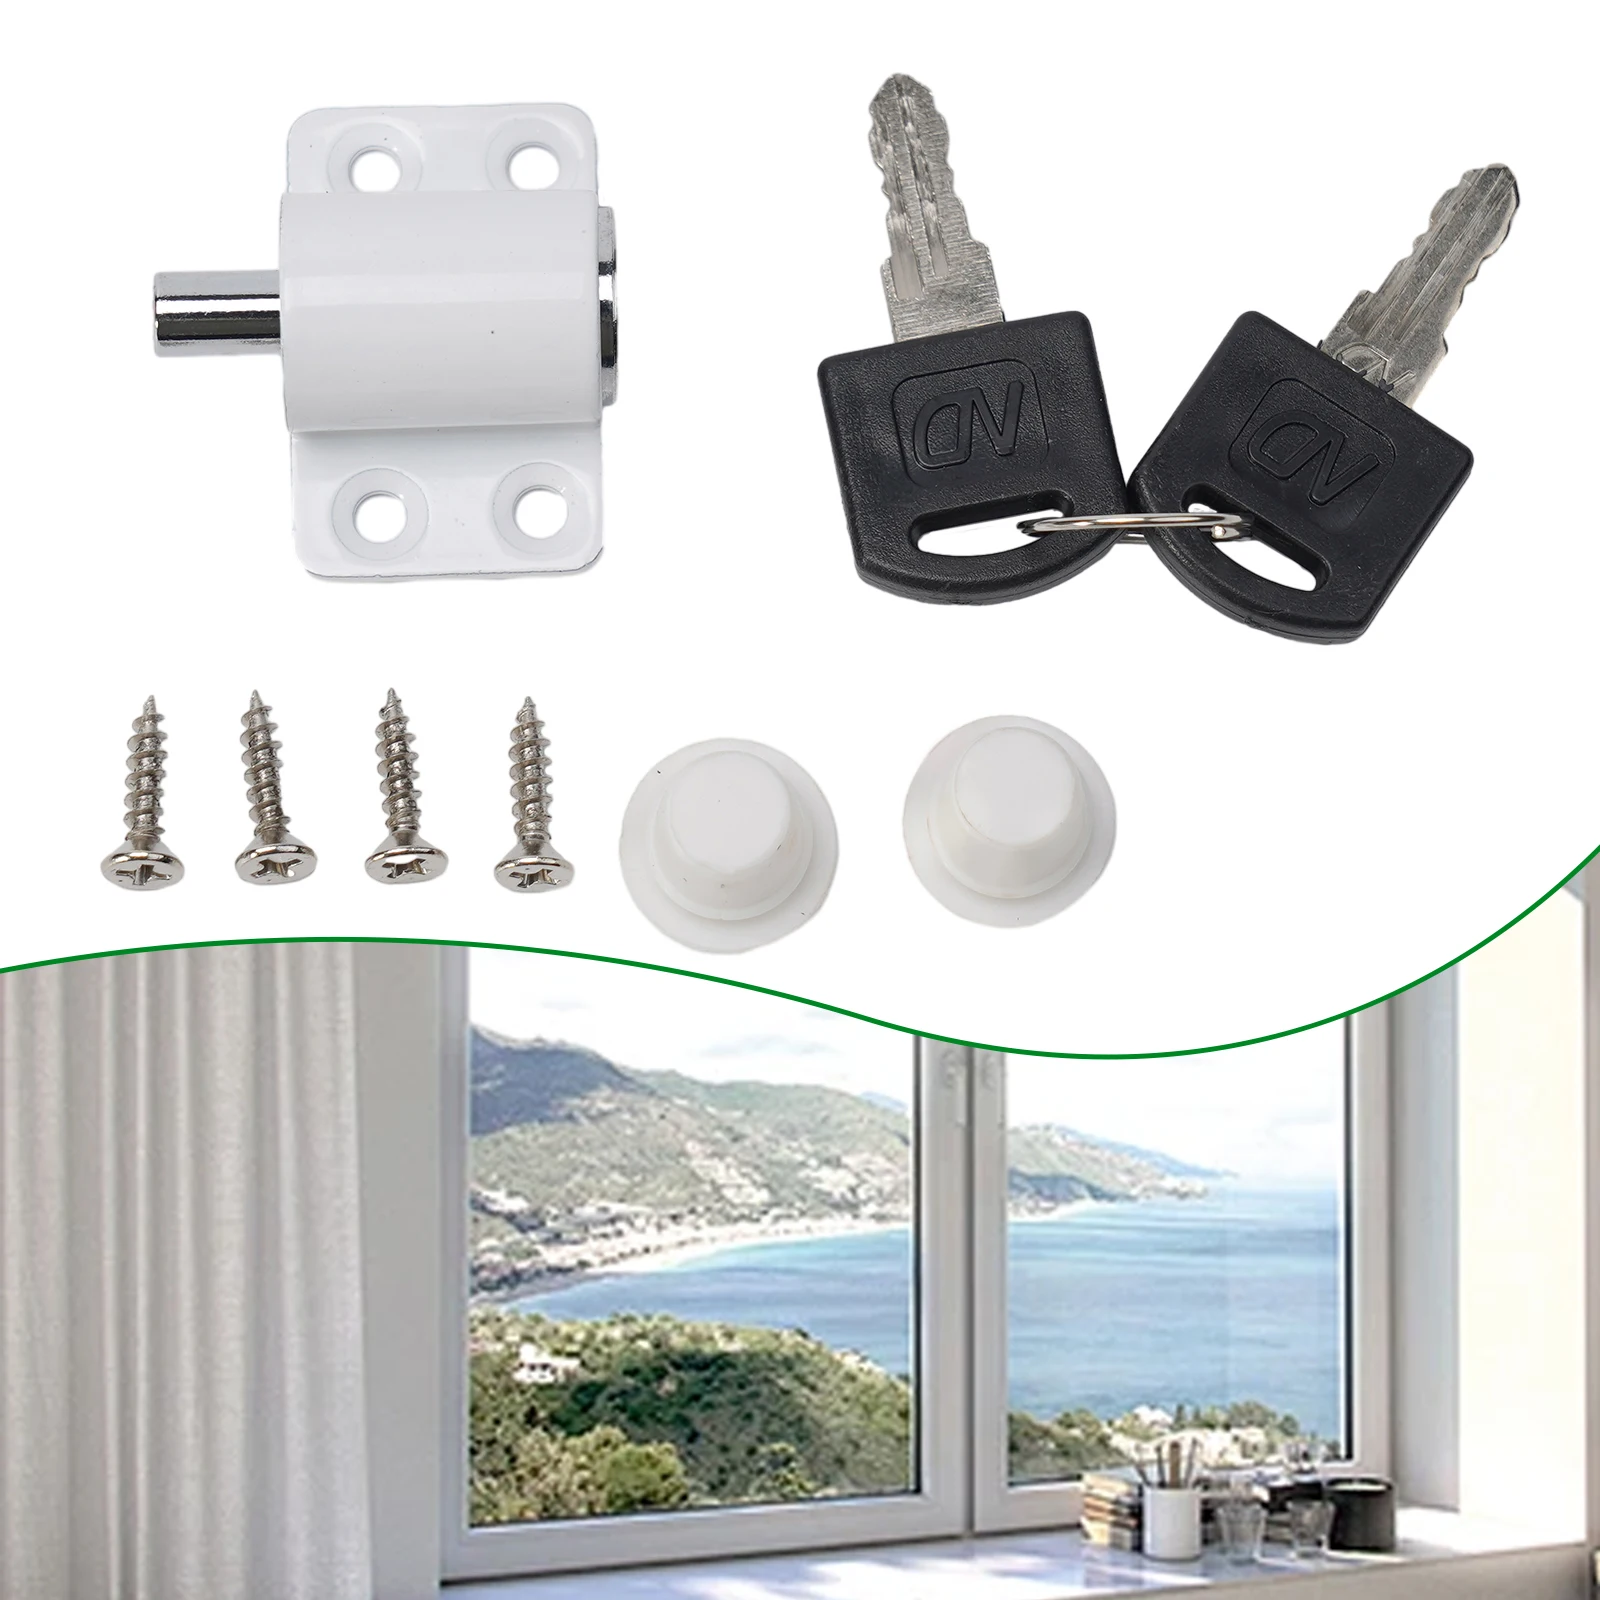 

Patio Sliding Door Lock Bolt Easy Install Security White/Silver/Black With Key Frame Catch Latch Security Bolt